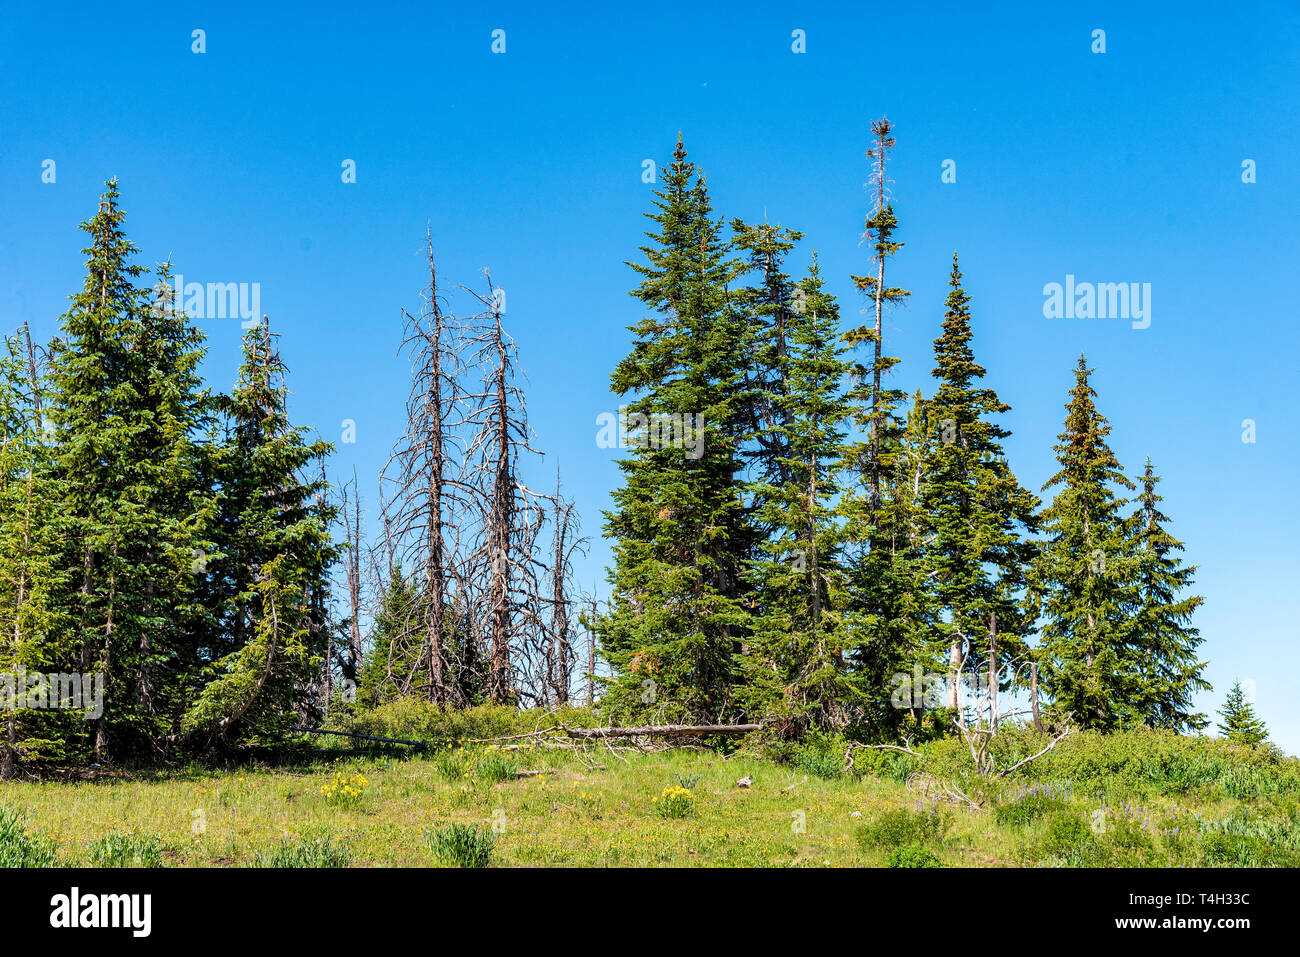 Tall green pine trees on hilltop, with a few dead trees under a blue sky. green grassy hilltop. Stock Photo